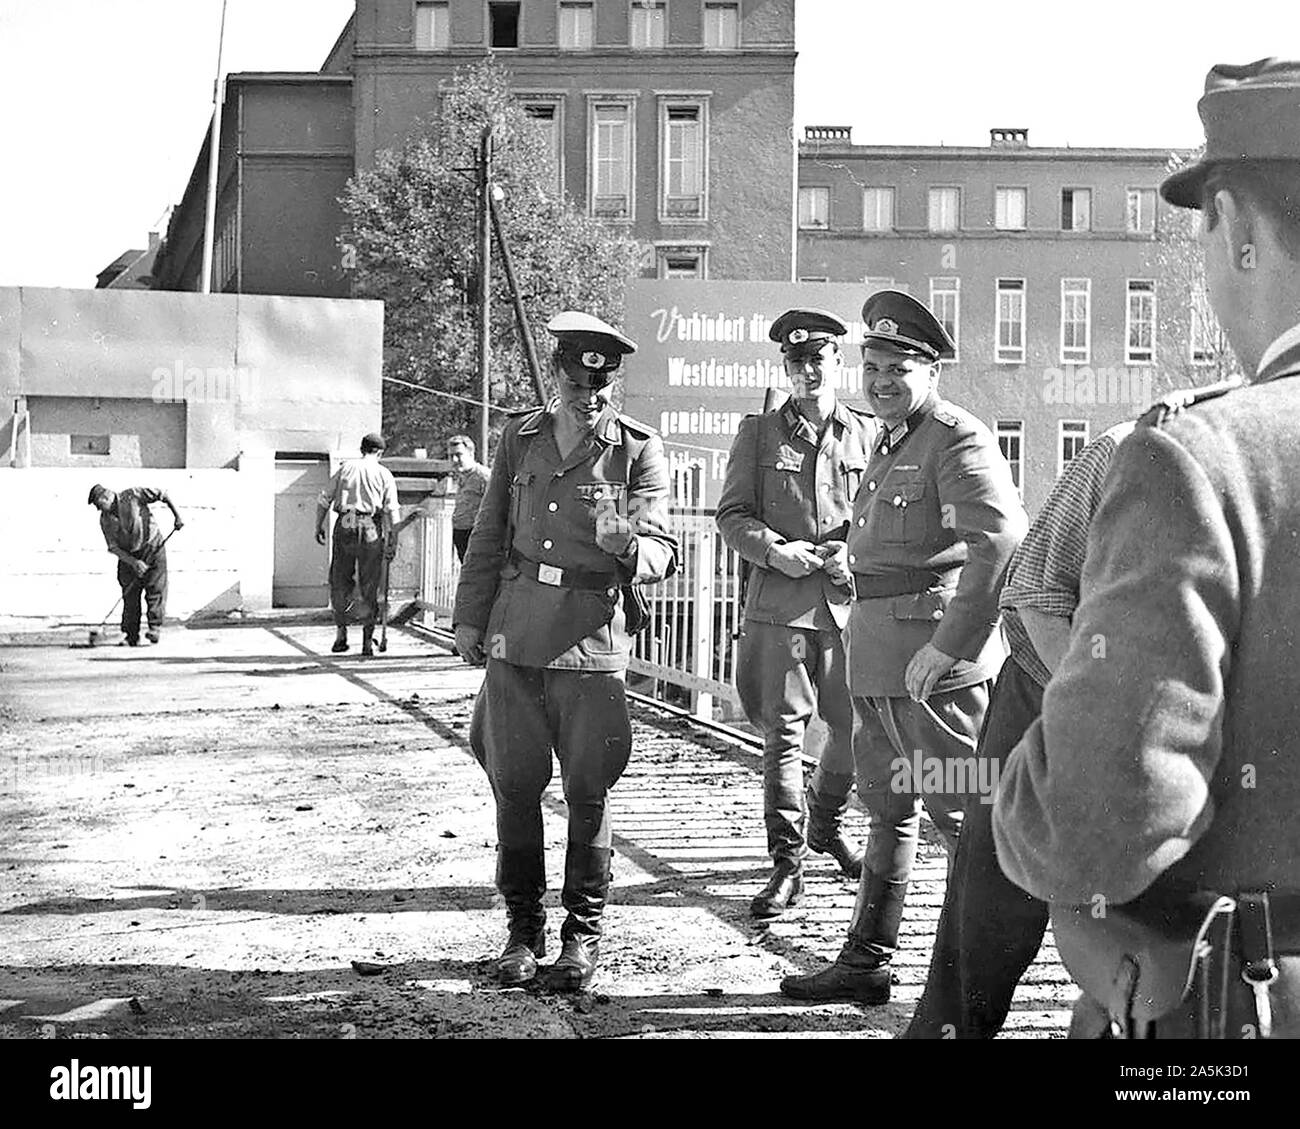 9/24/1964 - Guarded Street Workers at Sandkrug Bridge Stock Photo